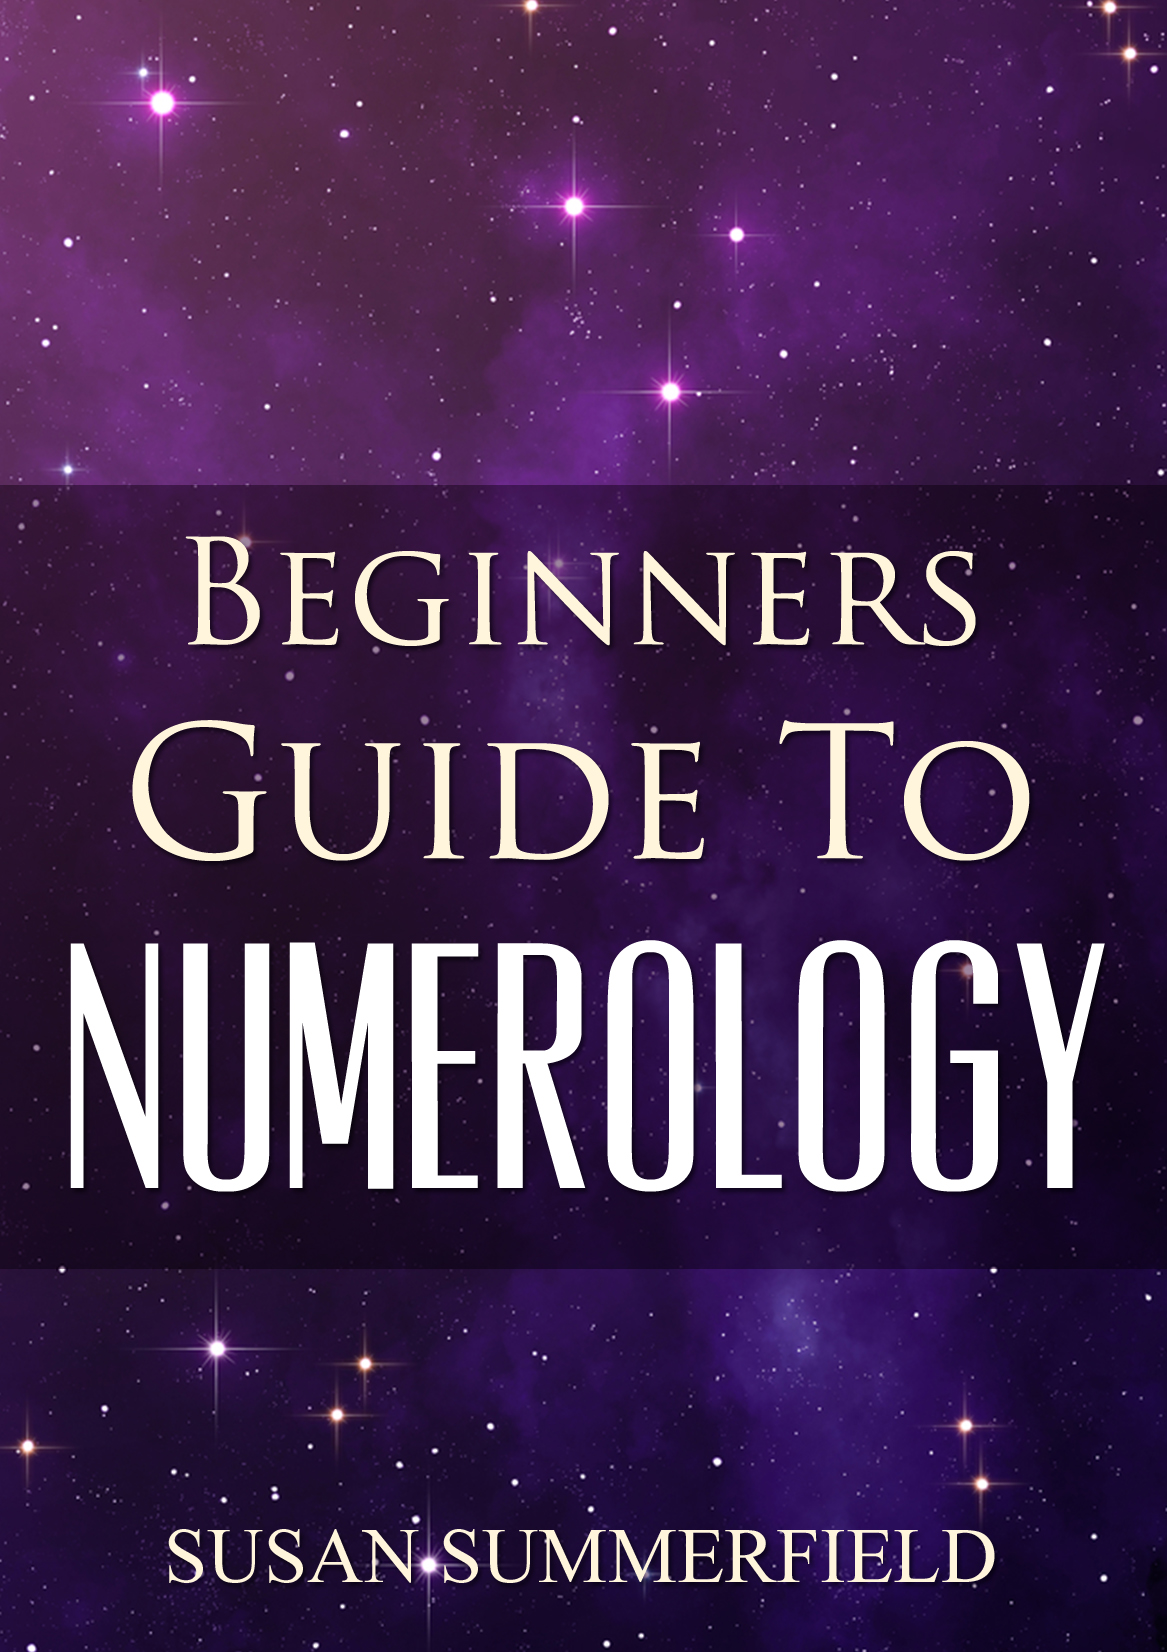 FREE: Beginners Guide To Numerology by Susan Summerfield